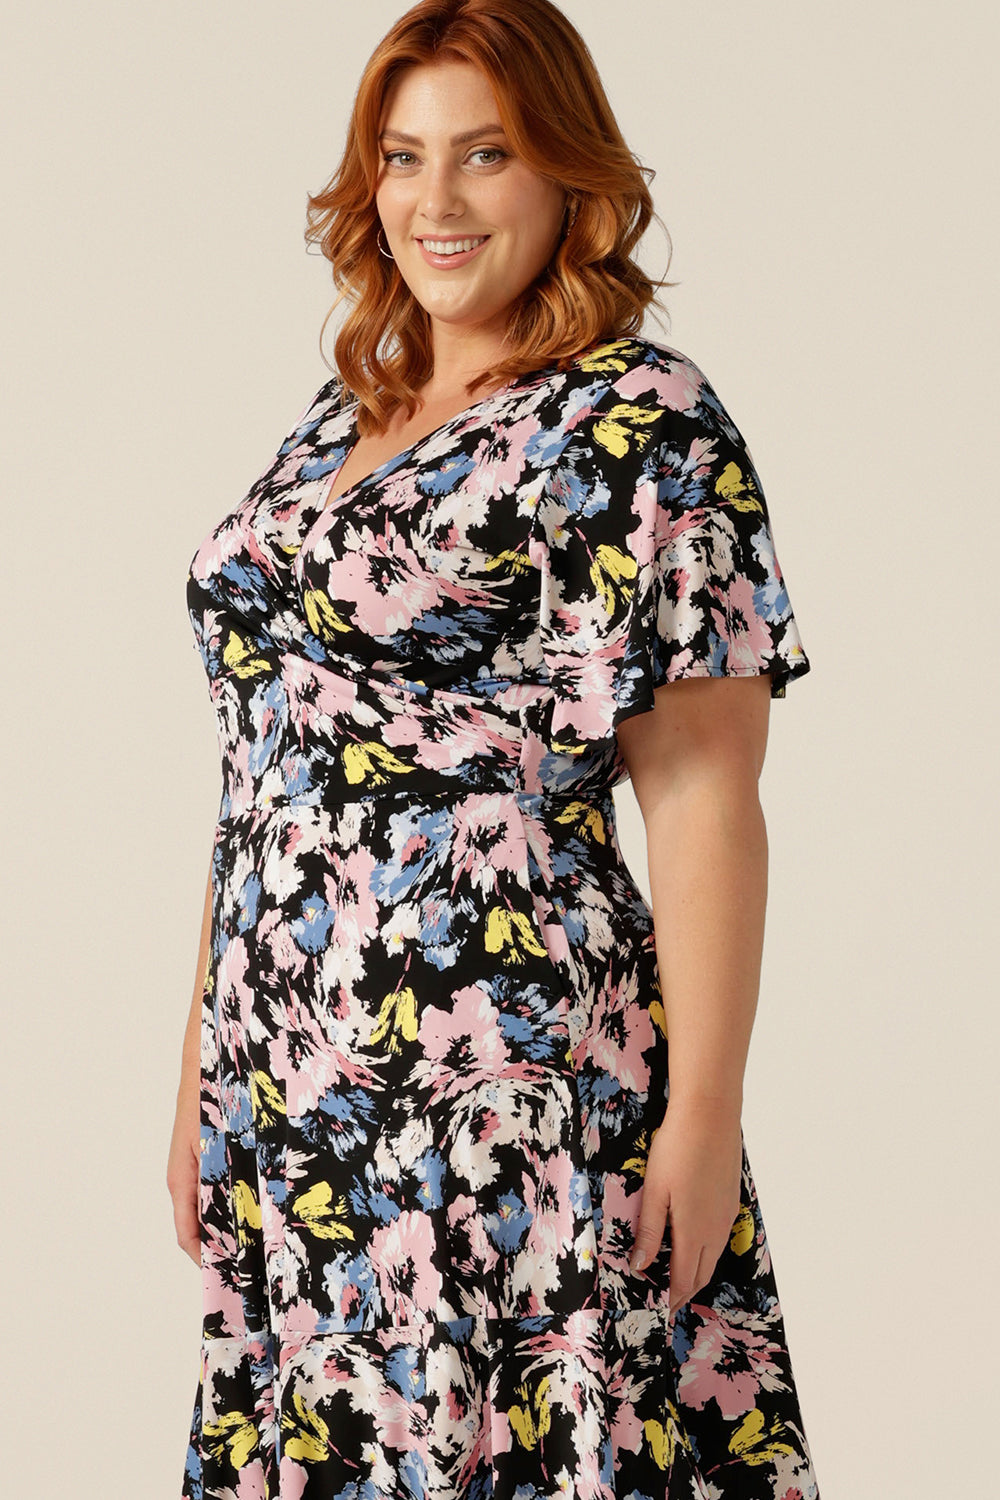 Vintage floral print dresses for women over 40, the Nicolle Reversible Dress has short sleeves and a full knee-length-skirt. A reversible dress, it can be worn as a V-neck wrap dress or backwards with a boat neckline. Well made and well-fitting in sizes 8 to size 24, shop jersey wrap dresses at Leina and Fleur online